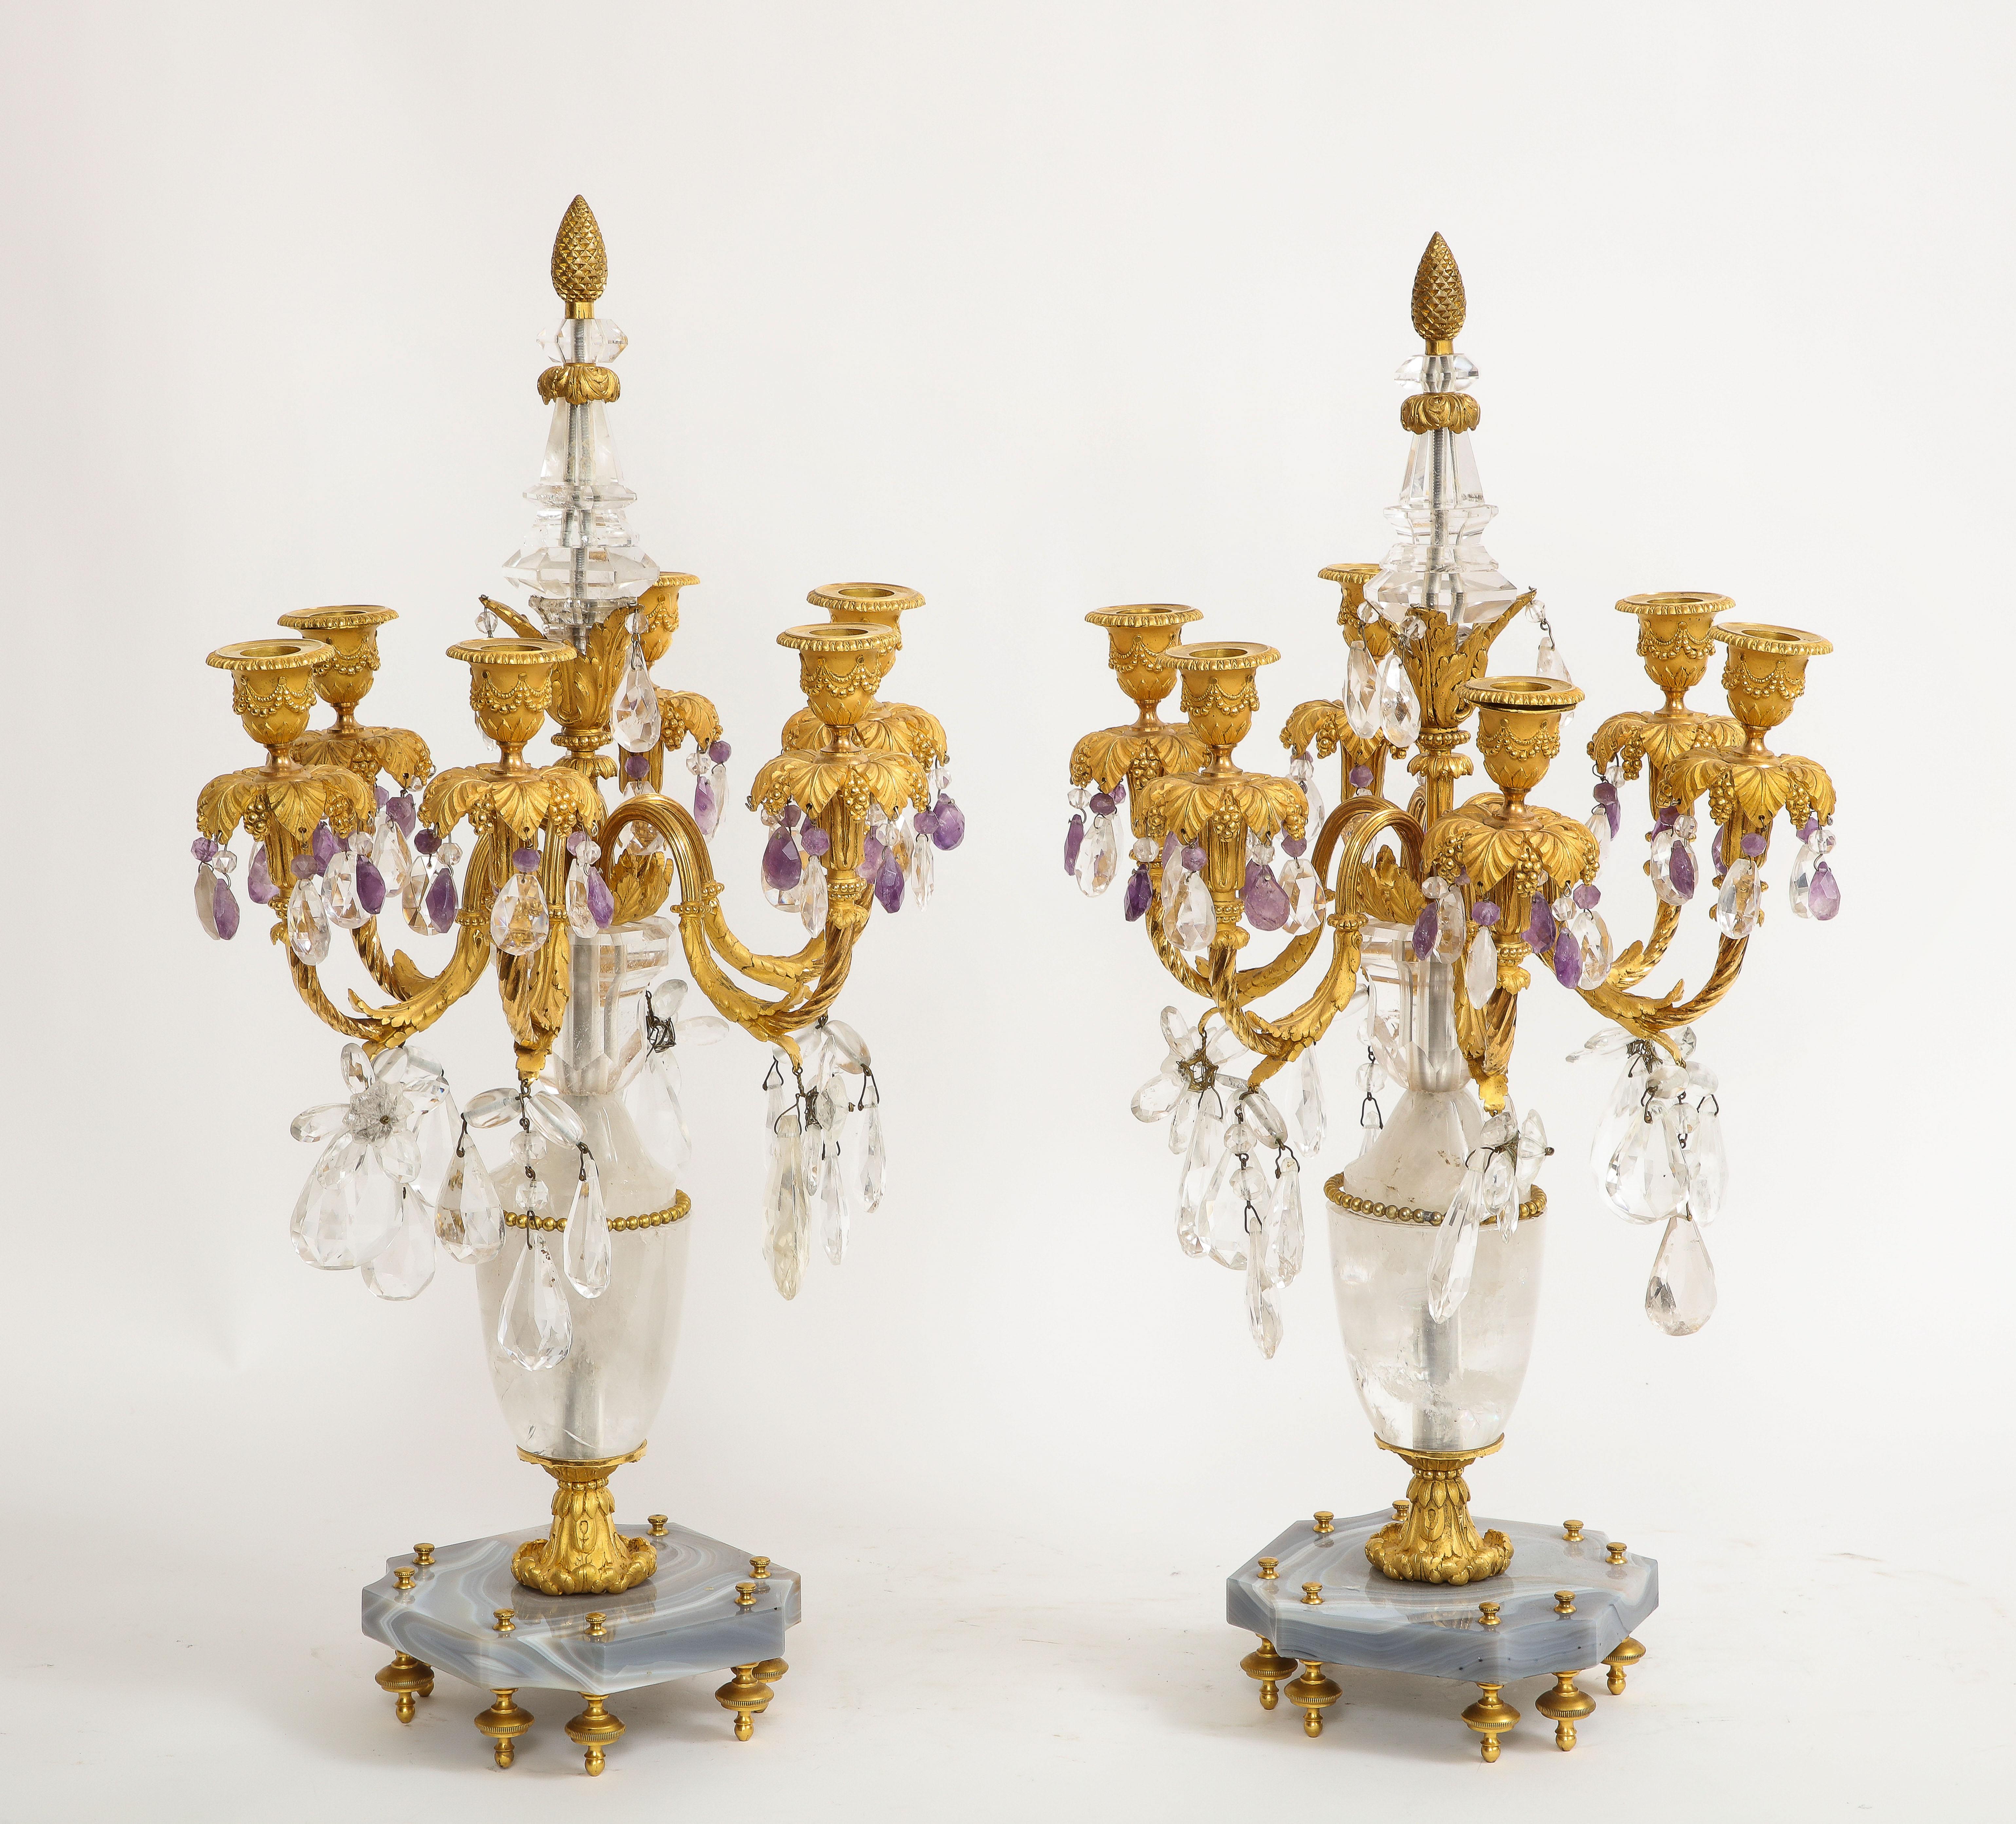 A magnificent pair of 19th Century Louis XVI Style French dore bronze mounted hand carved agate, rock crystal, and amethyst candelabra. The dore bronze mounts are truly impressive on this pair of candelabra. Each section of the mounts are